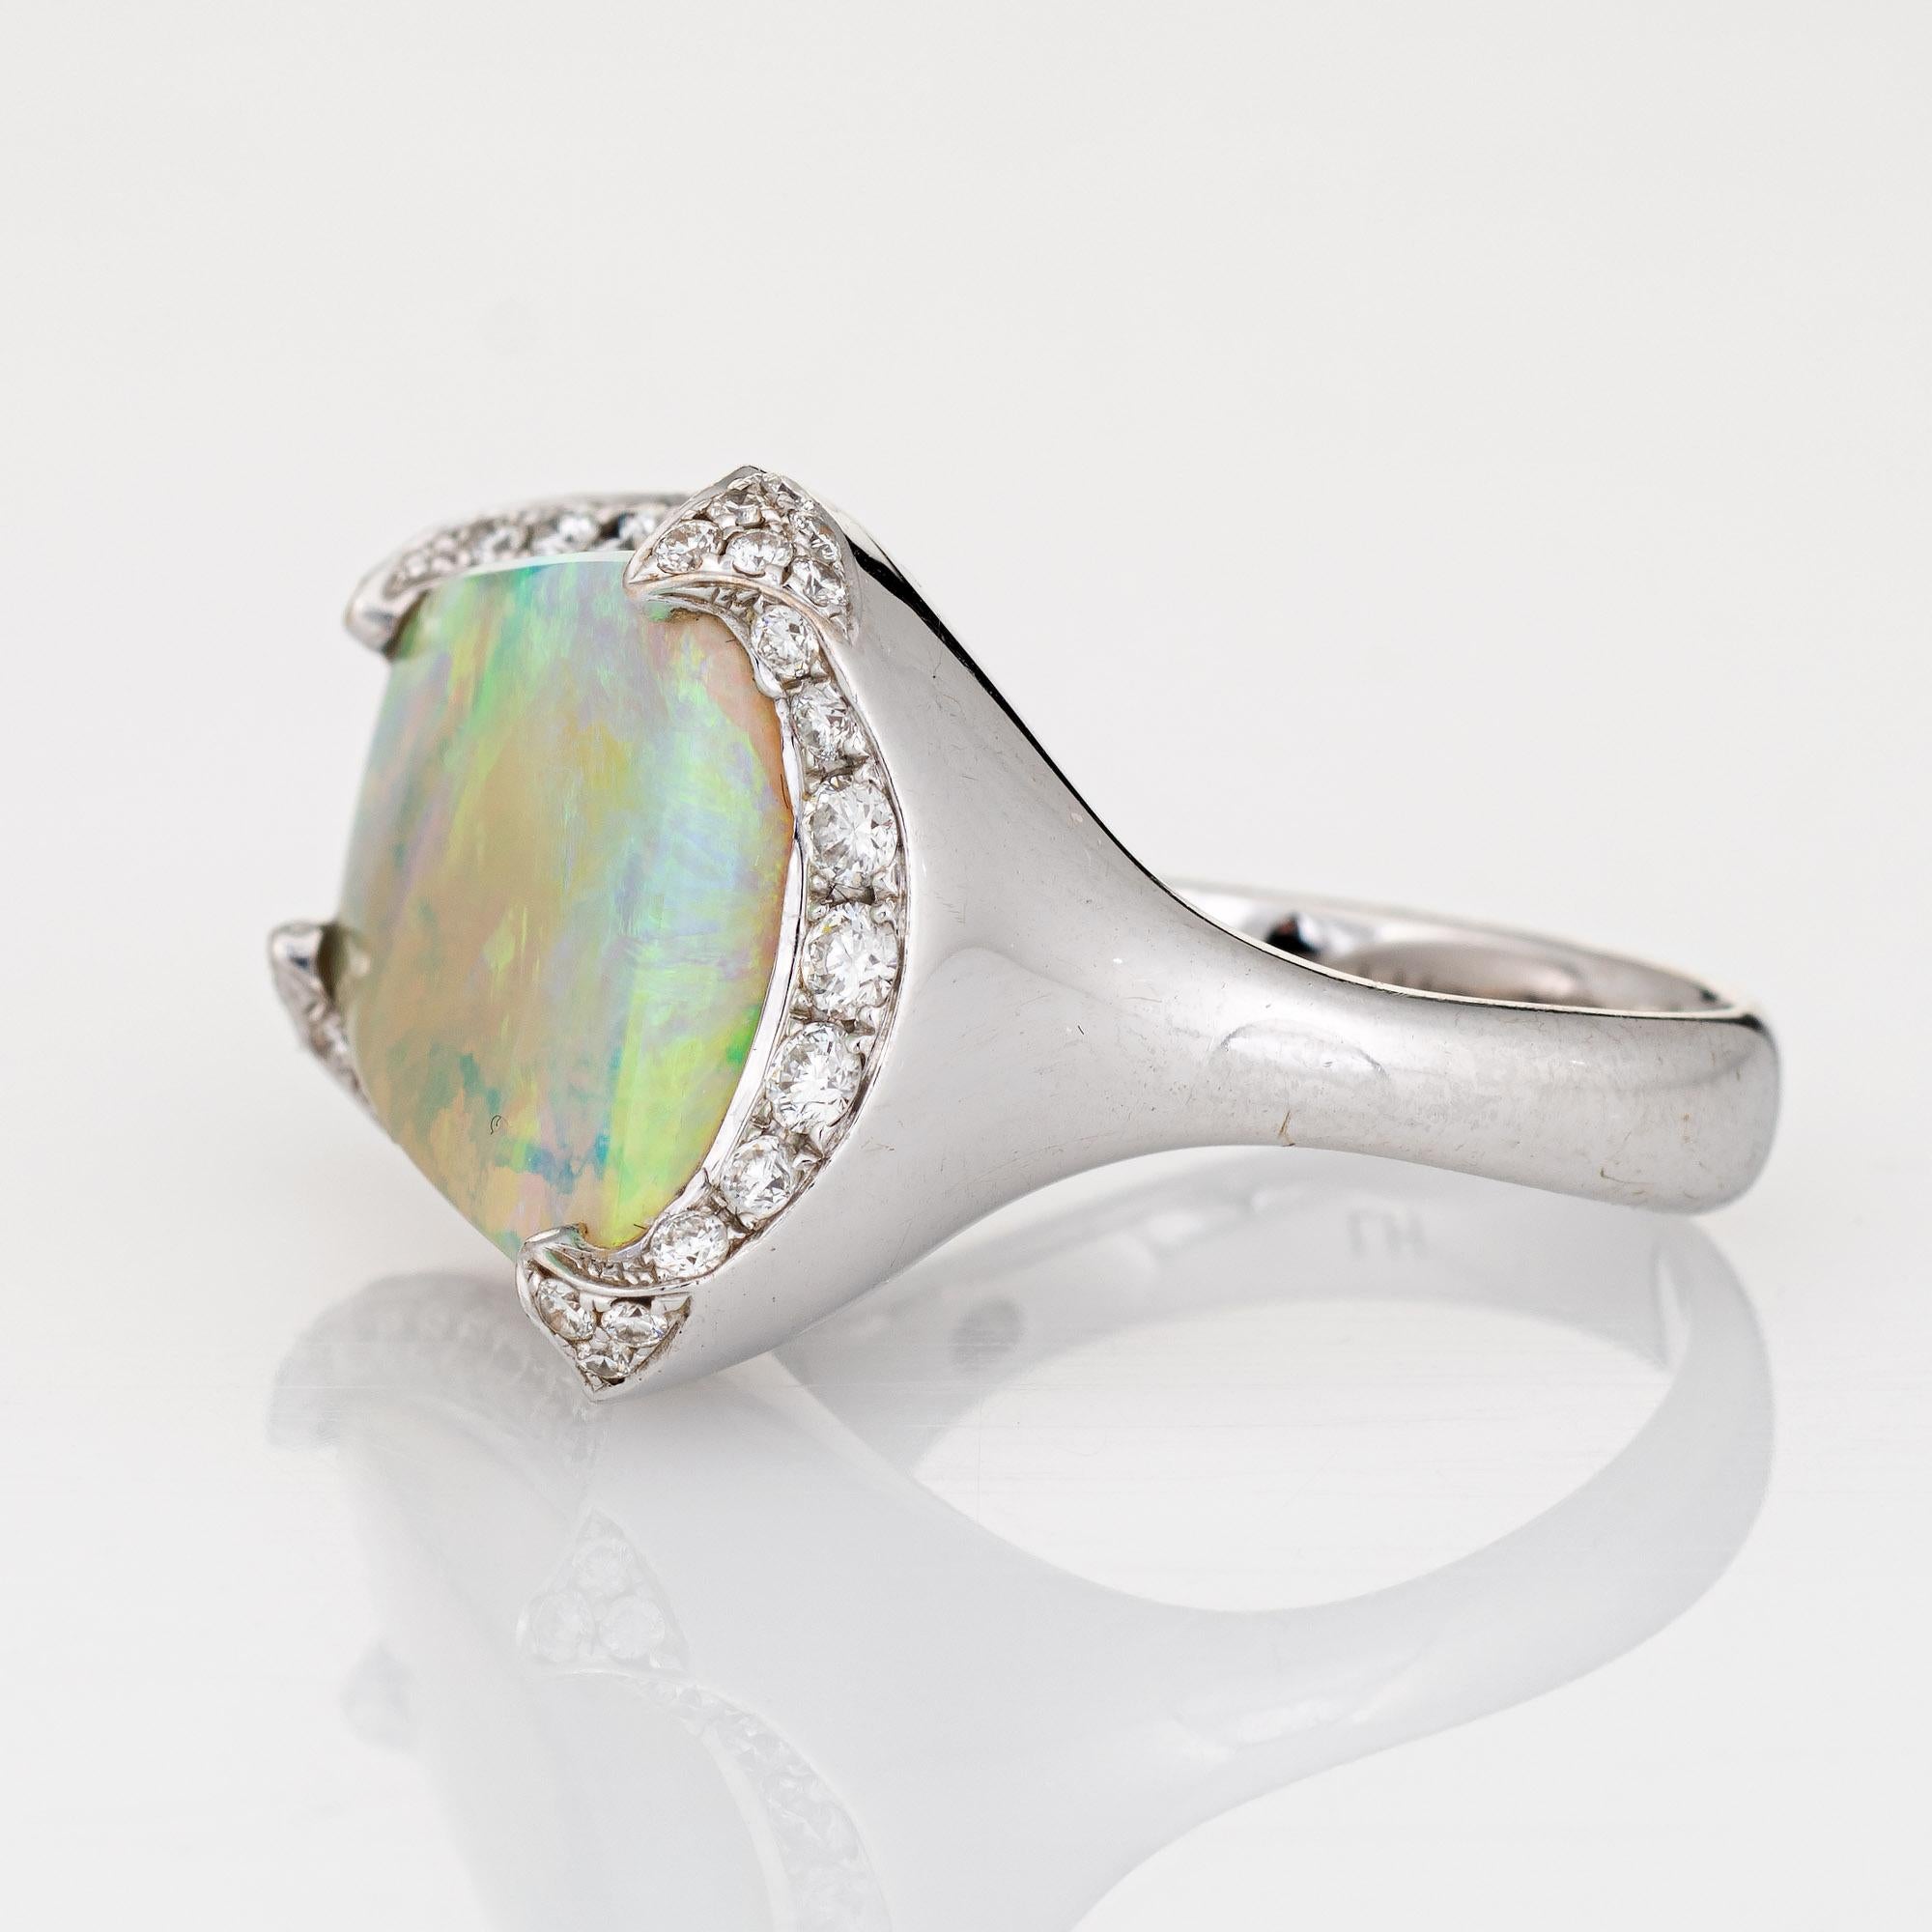 Cabochon 10.64ct Natural Opal Diamond Ring Estate 18k White Gold Sz 7 Fine Jewelry  For Sale